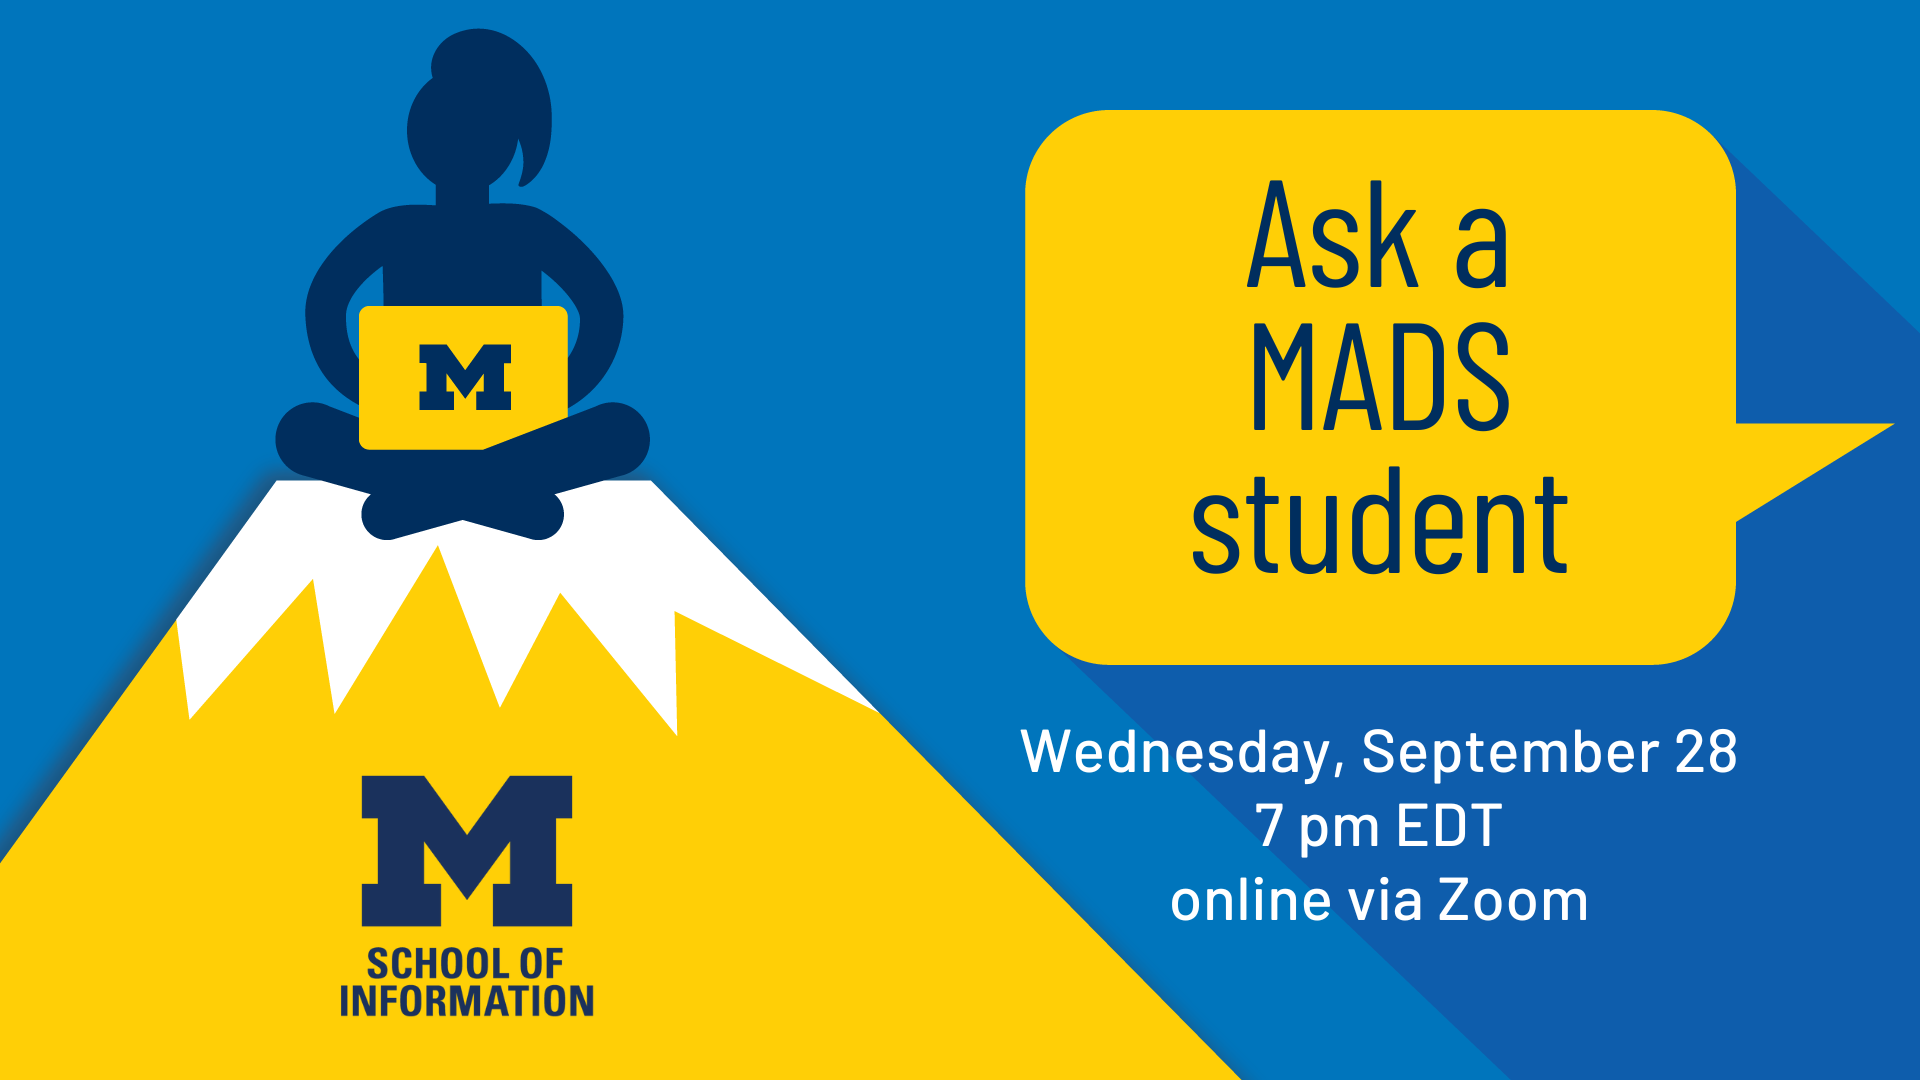 "Ask a MADS student. Wednesday, September 28. 7 pm EDT. online via Zoom."